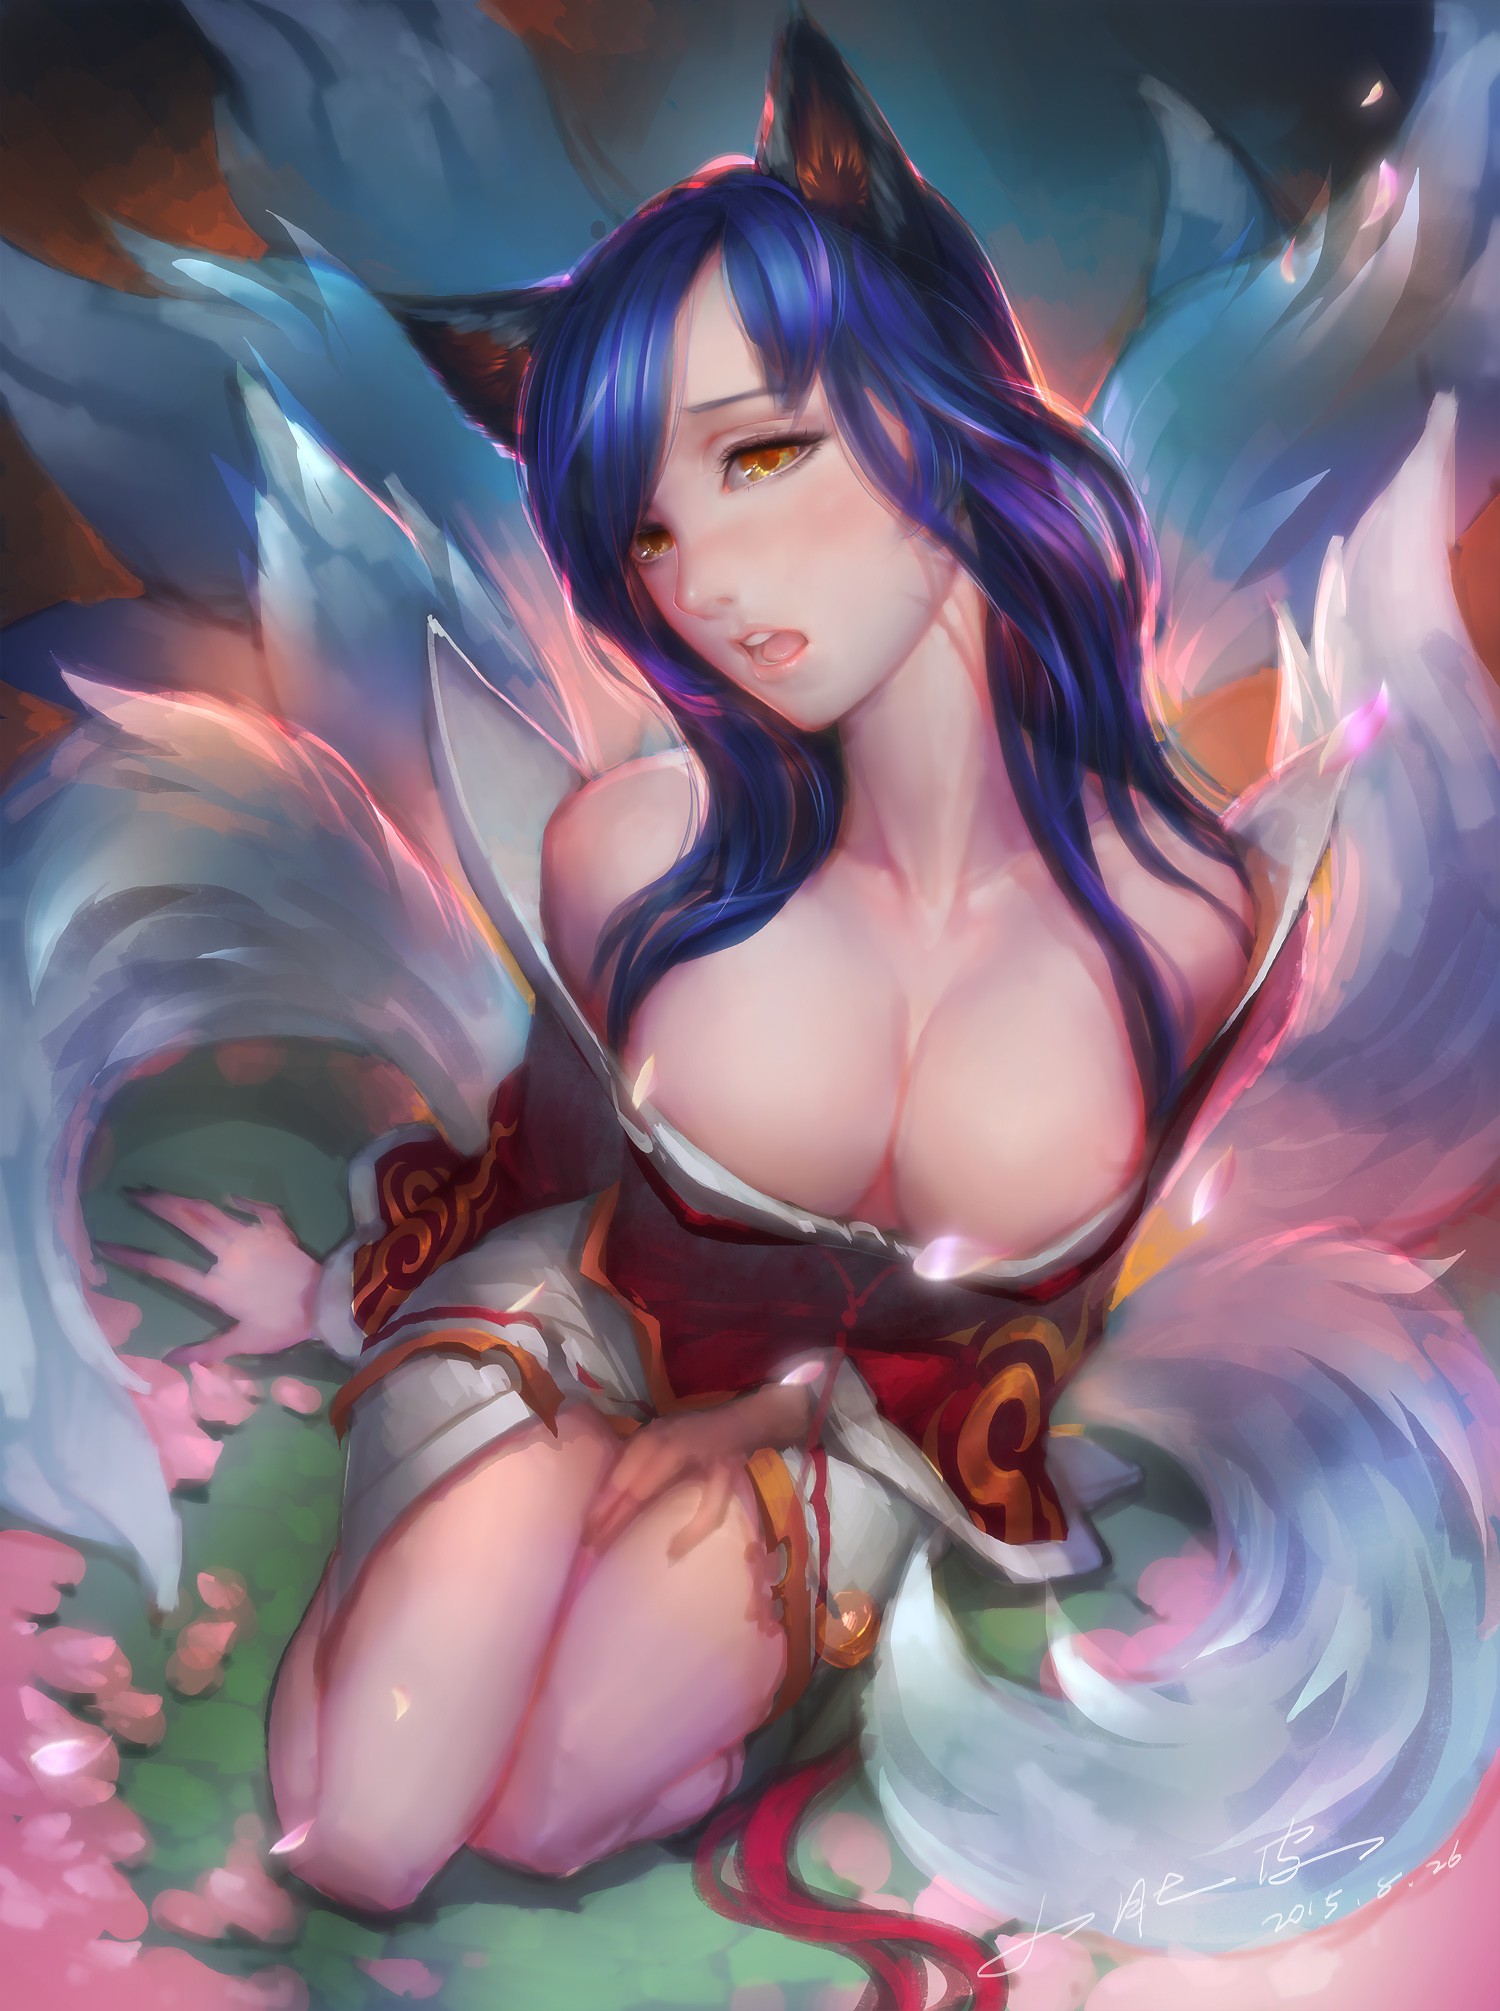 Anime 1500x2011 anime anime girls League of Legends Ahri (League of Legends) animal ears cleavage tail long hair orange eyes blue hair open shirt boobs big boobs video game girls fan art video game characters PC gaming women thighs together glowing eyes fantasy art fantasy girl Pixiv